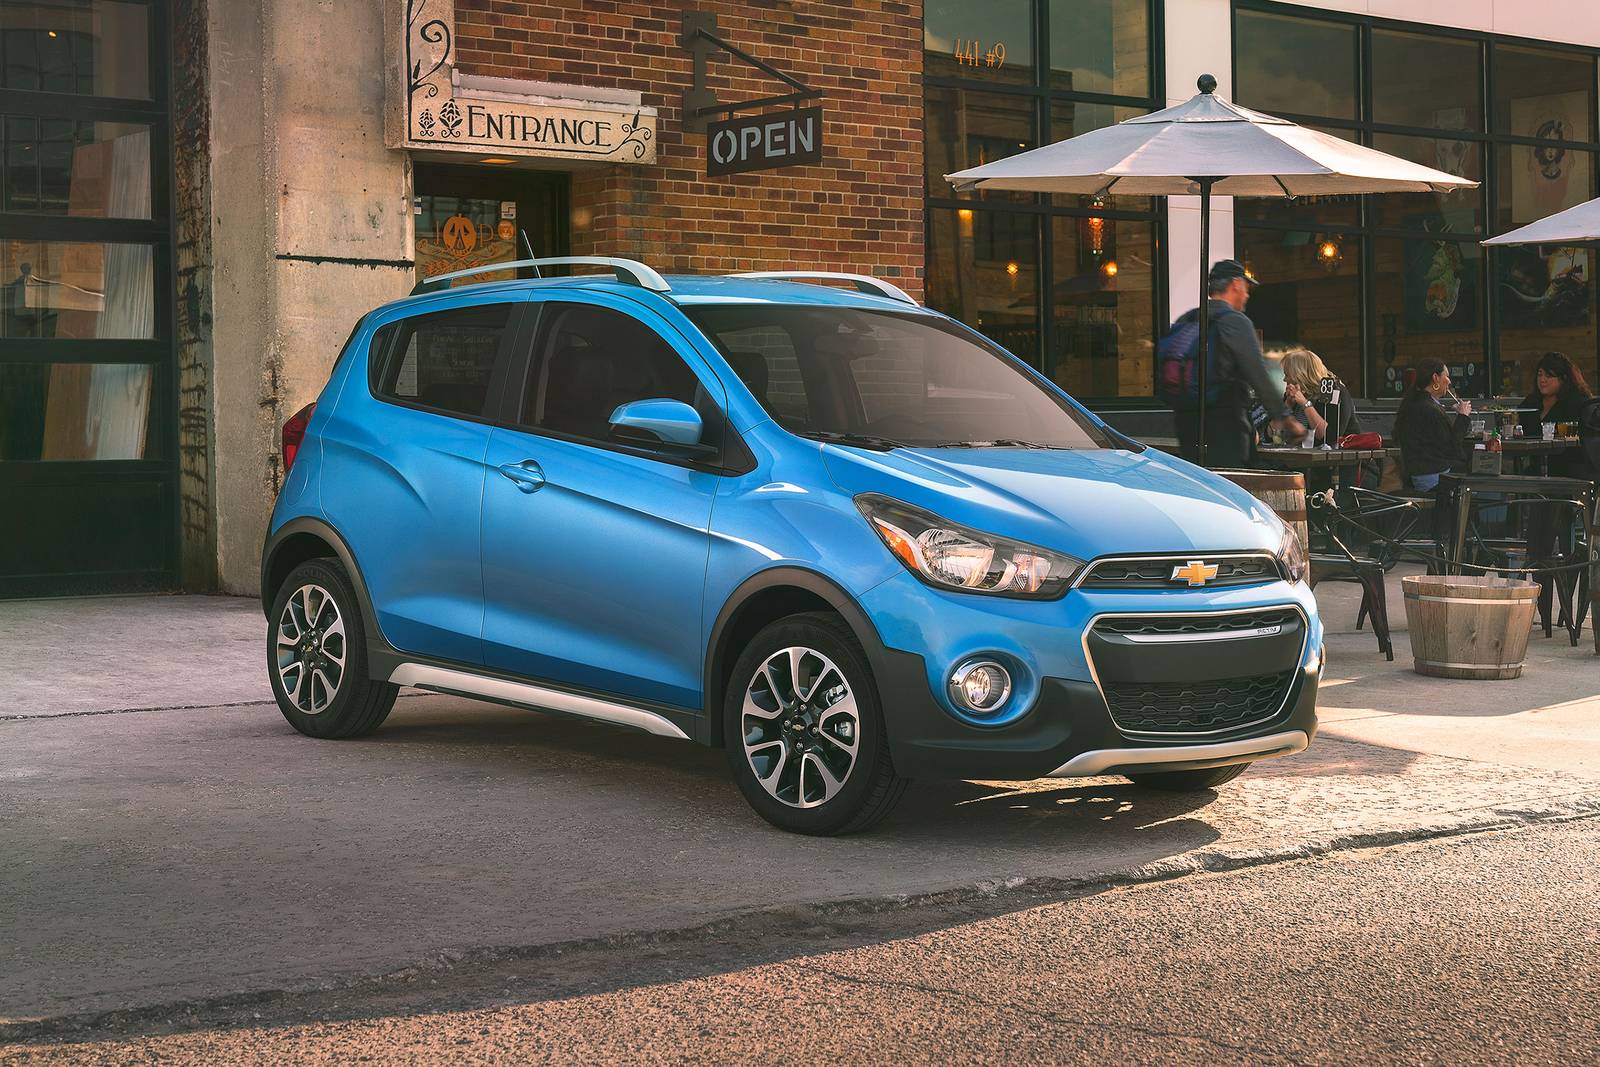 2020 Chevrolet Spark Prices, Reviews, and Pictures | Edmunds